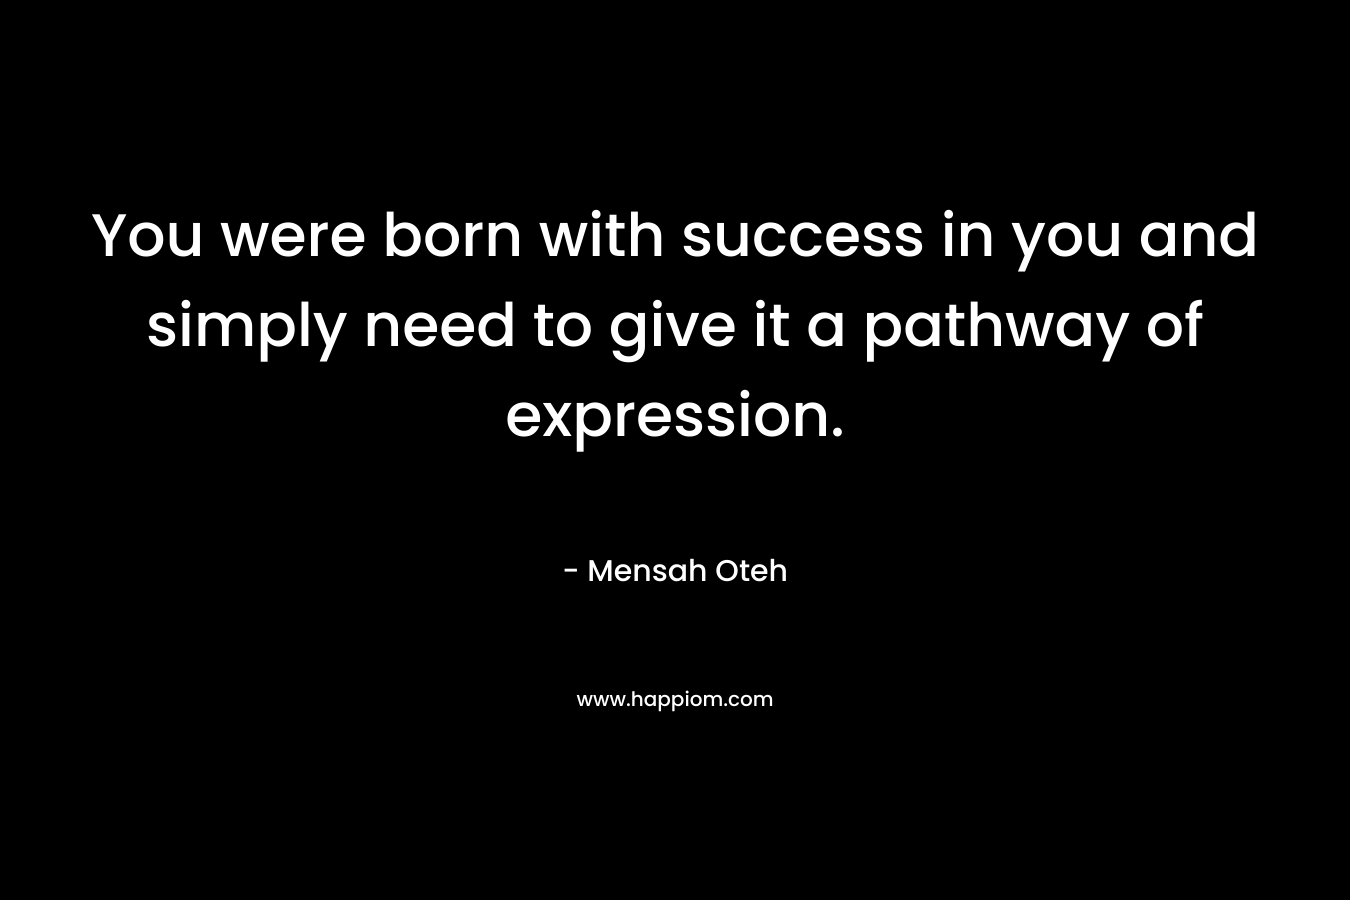 You were born with success in you and simply need to give it a pathway of expression. – Mensah Oteh